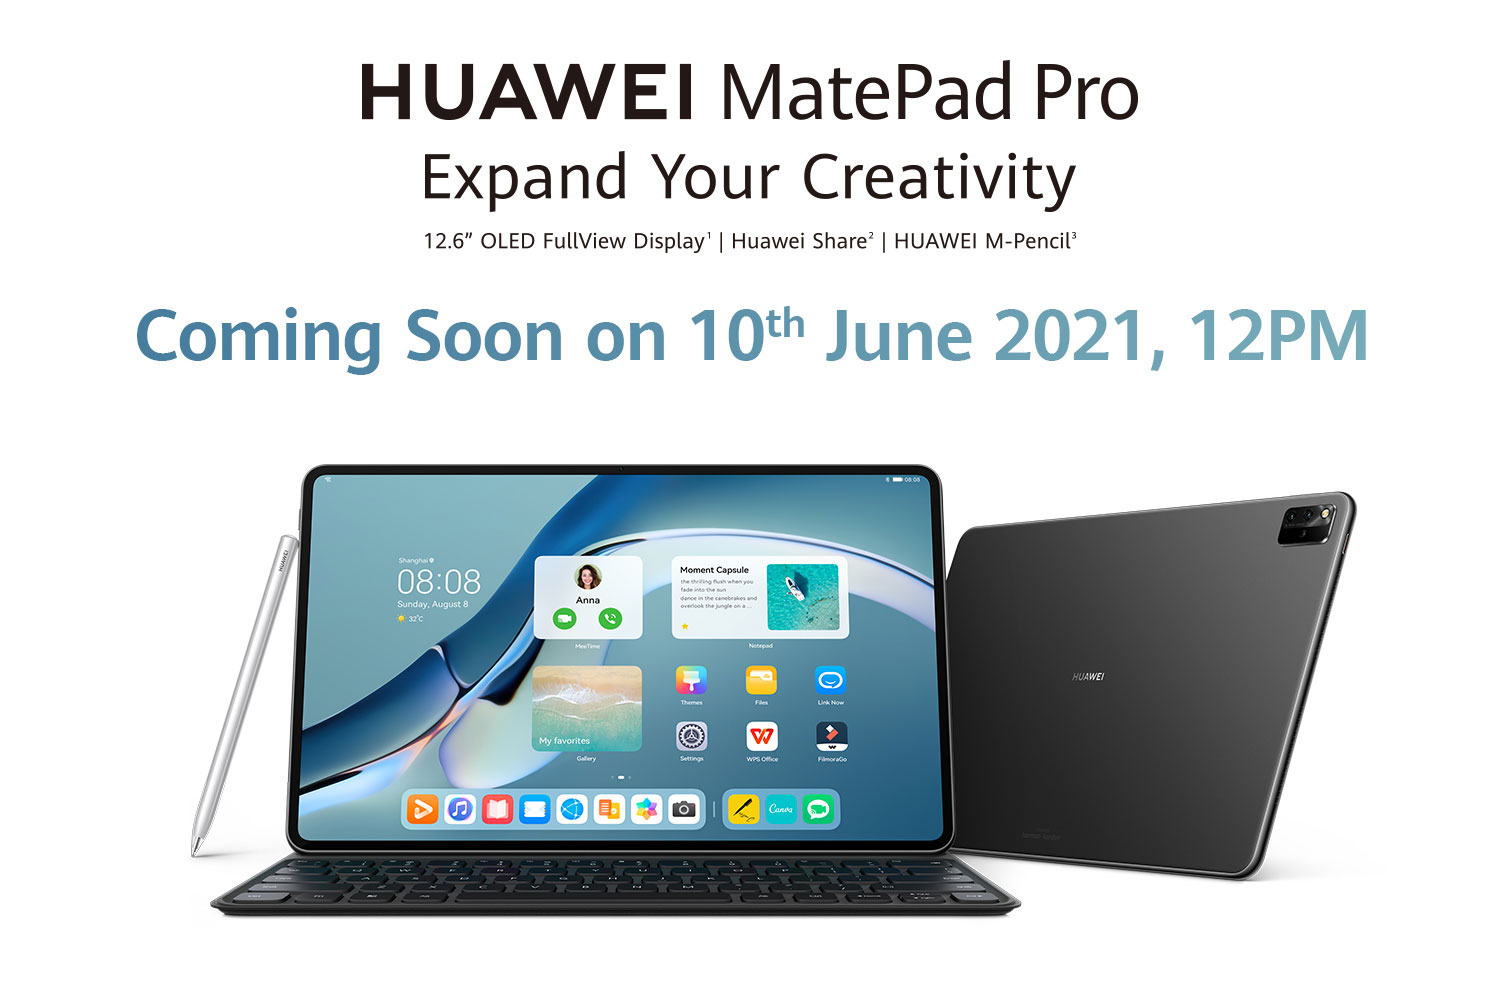 HUAWEI MatePad Pro 12.6-inch Coming on June 10th